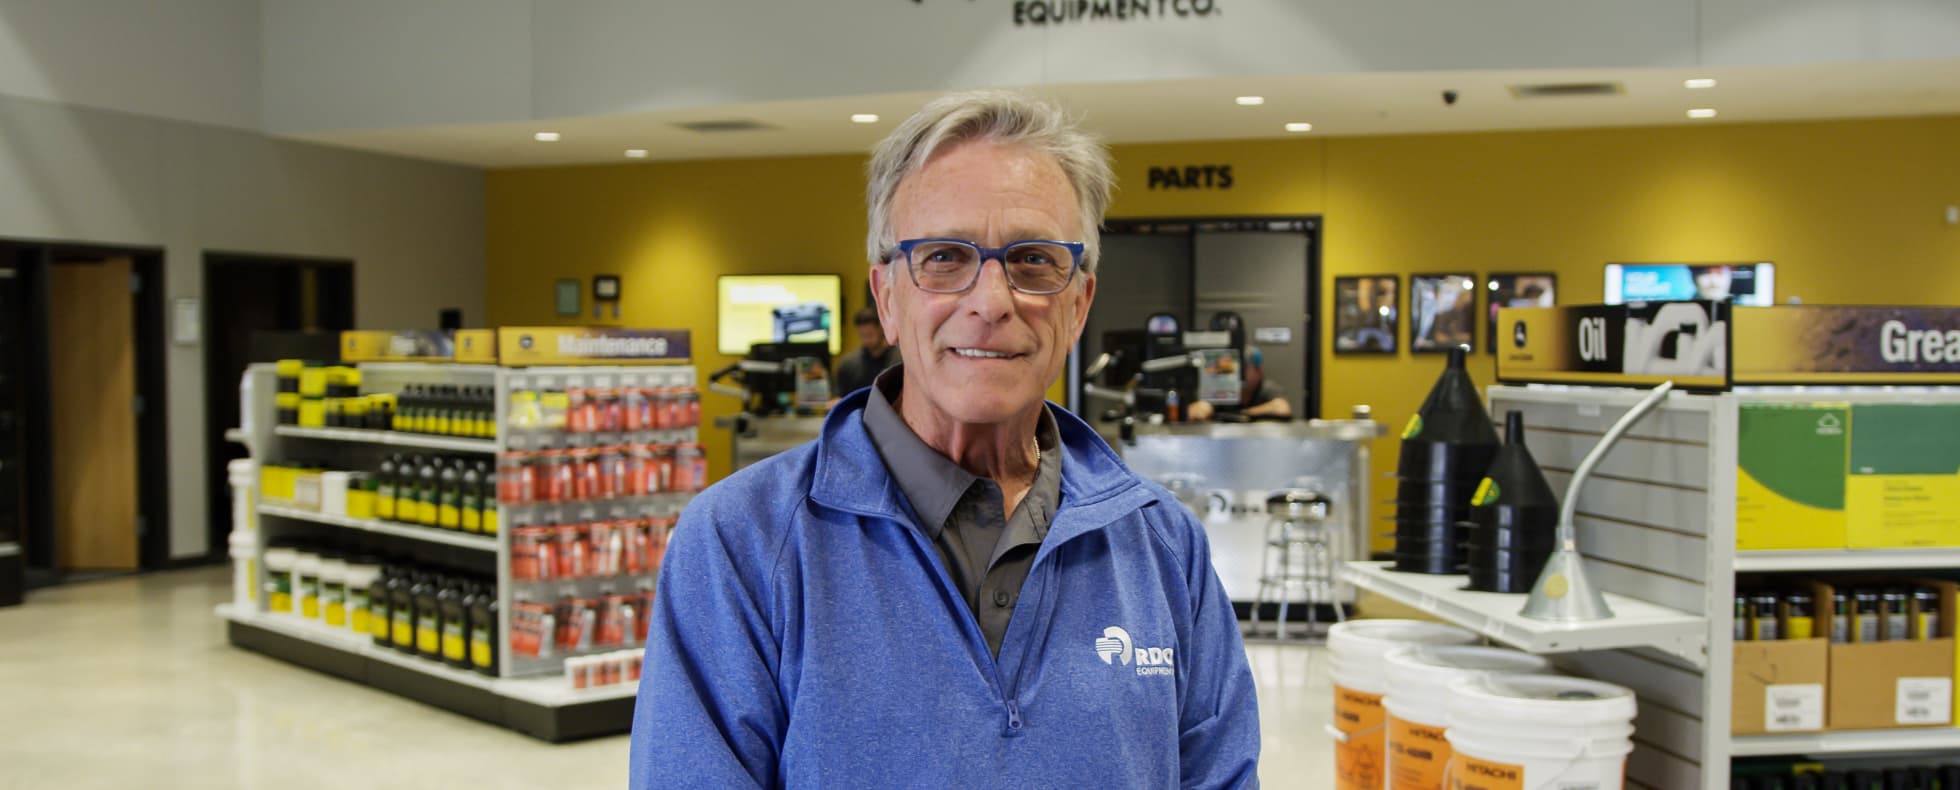 Jim Carell Retires after 18 Years with RDO Equipment Co.